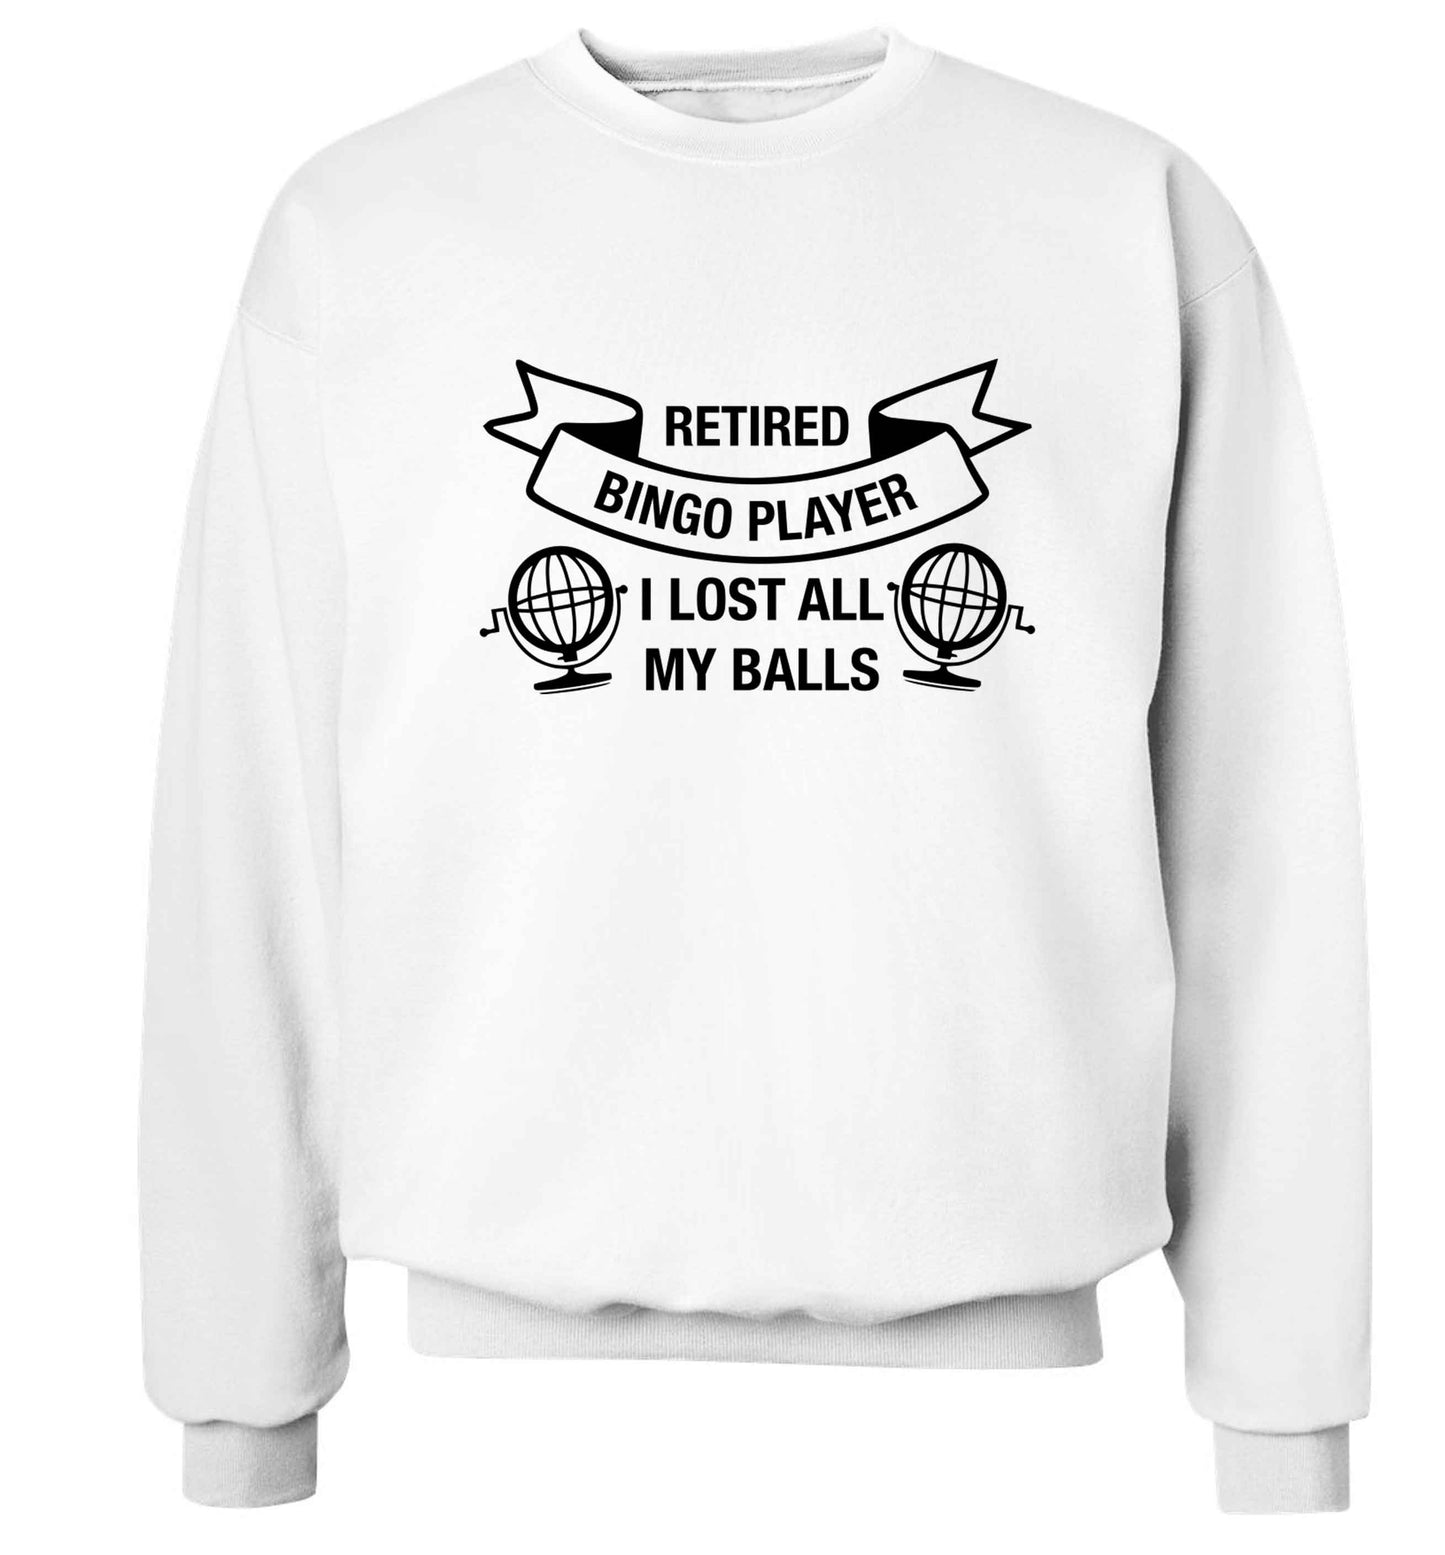 Retired bingo player I lost all my balls Adult's unisex white Sweater 2XL